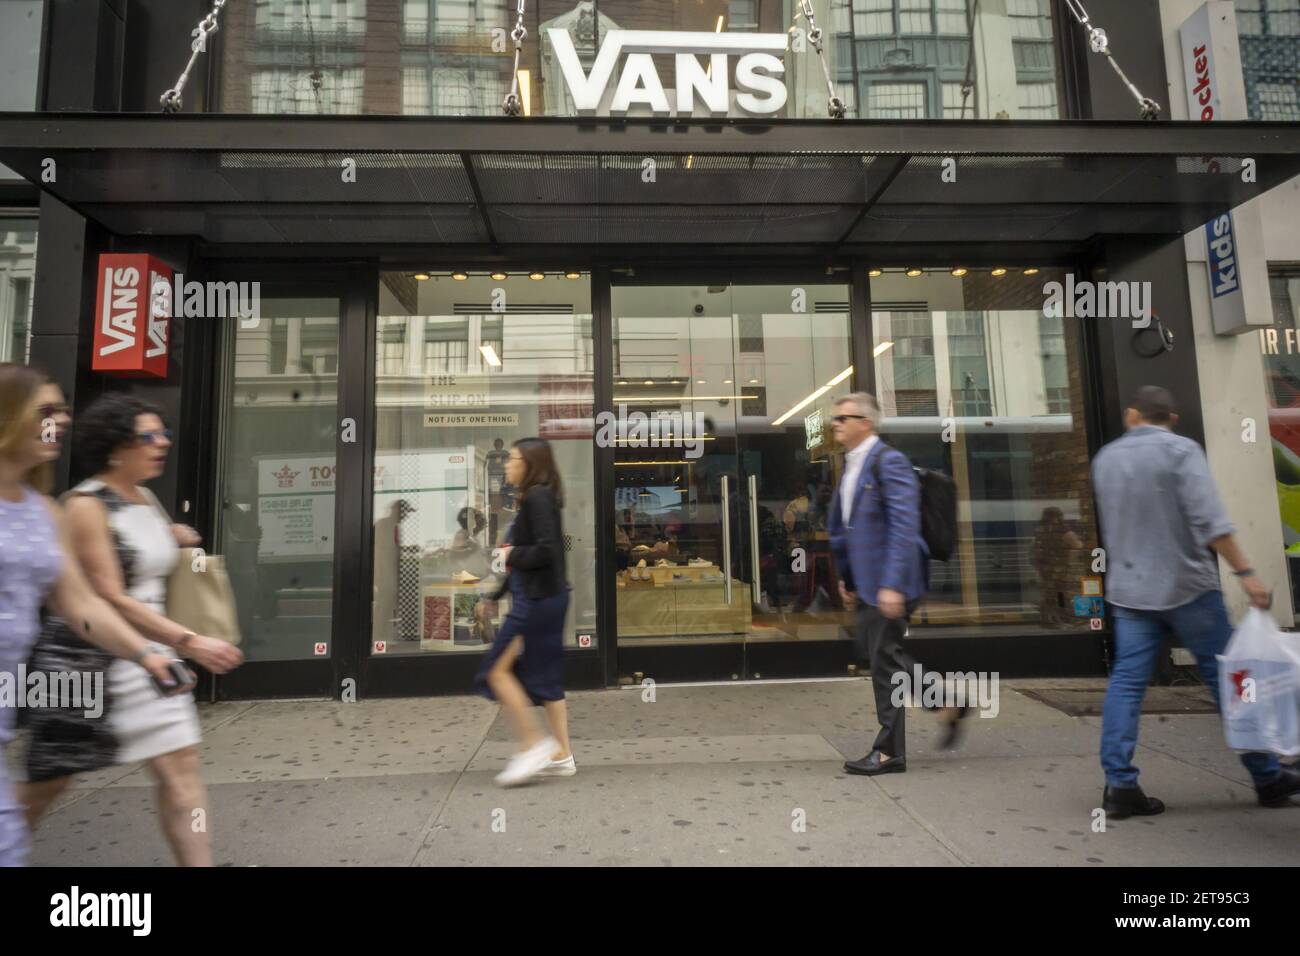 A Vans footwear store in Herald Square in New York on Friday, May 4, 2018.  VF Corp, owner of iconic brands Vans, North Face, Timberland, the closing  Henri Bendel and a multitude